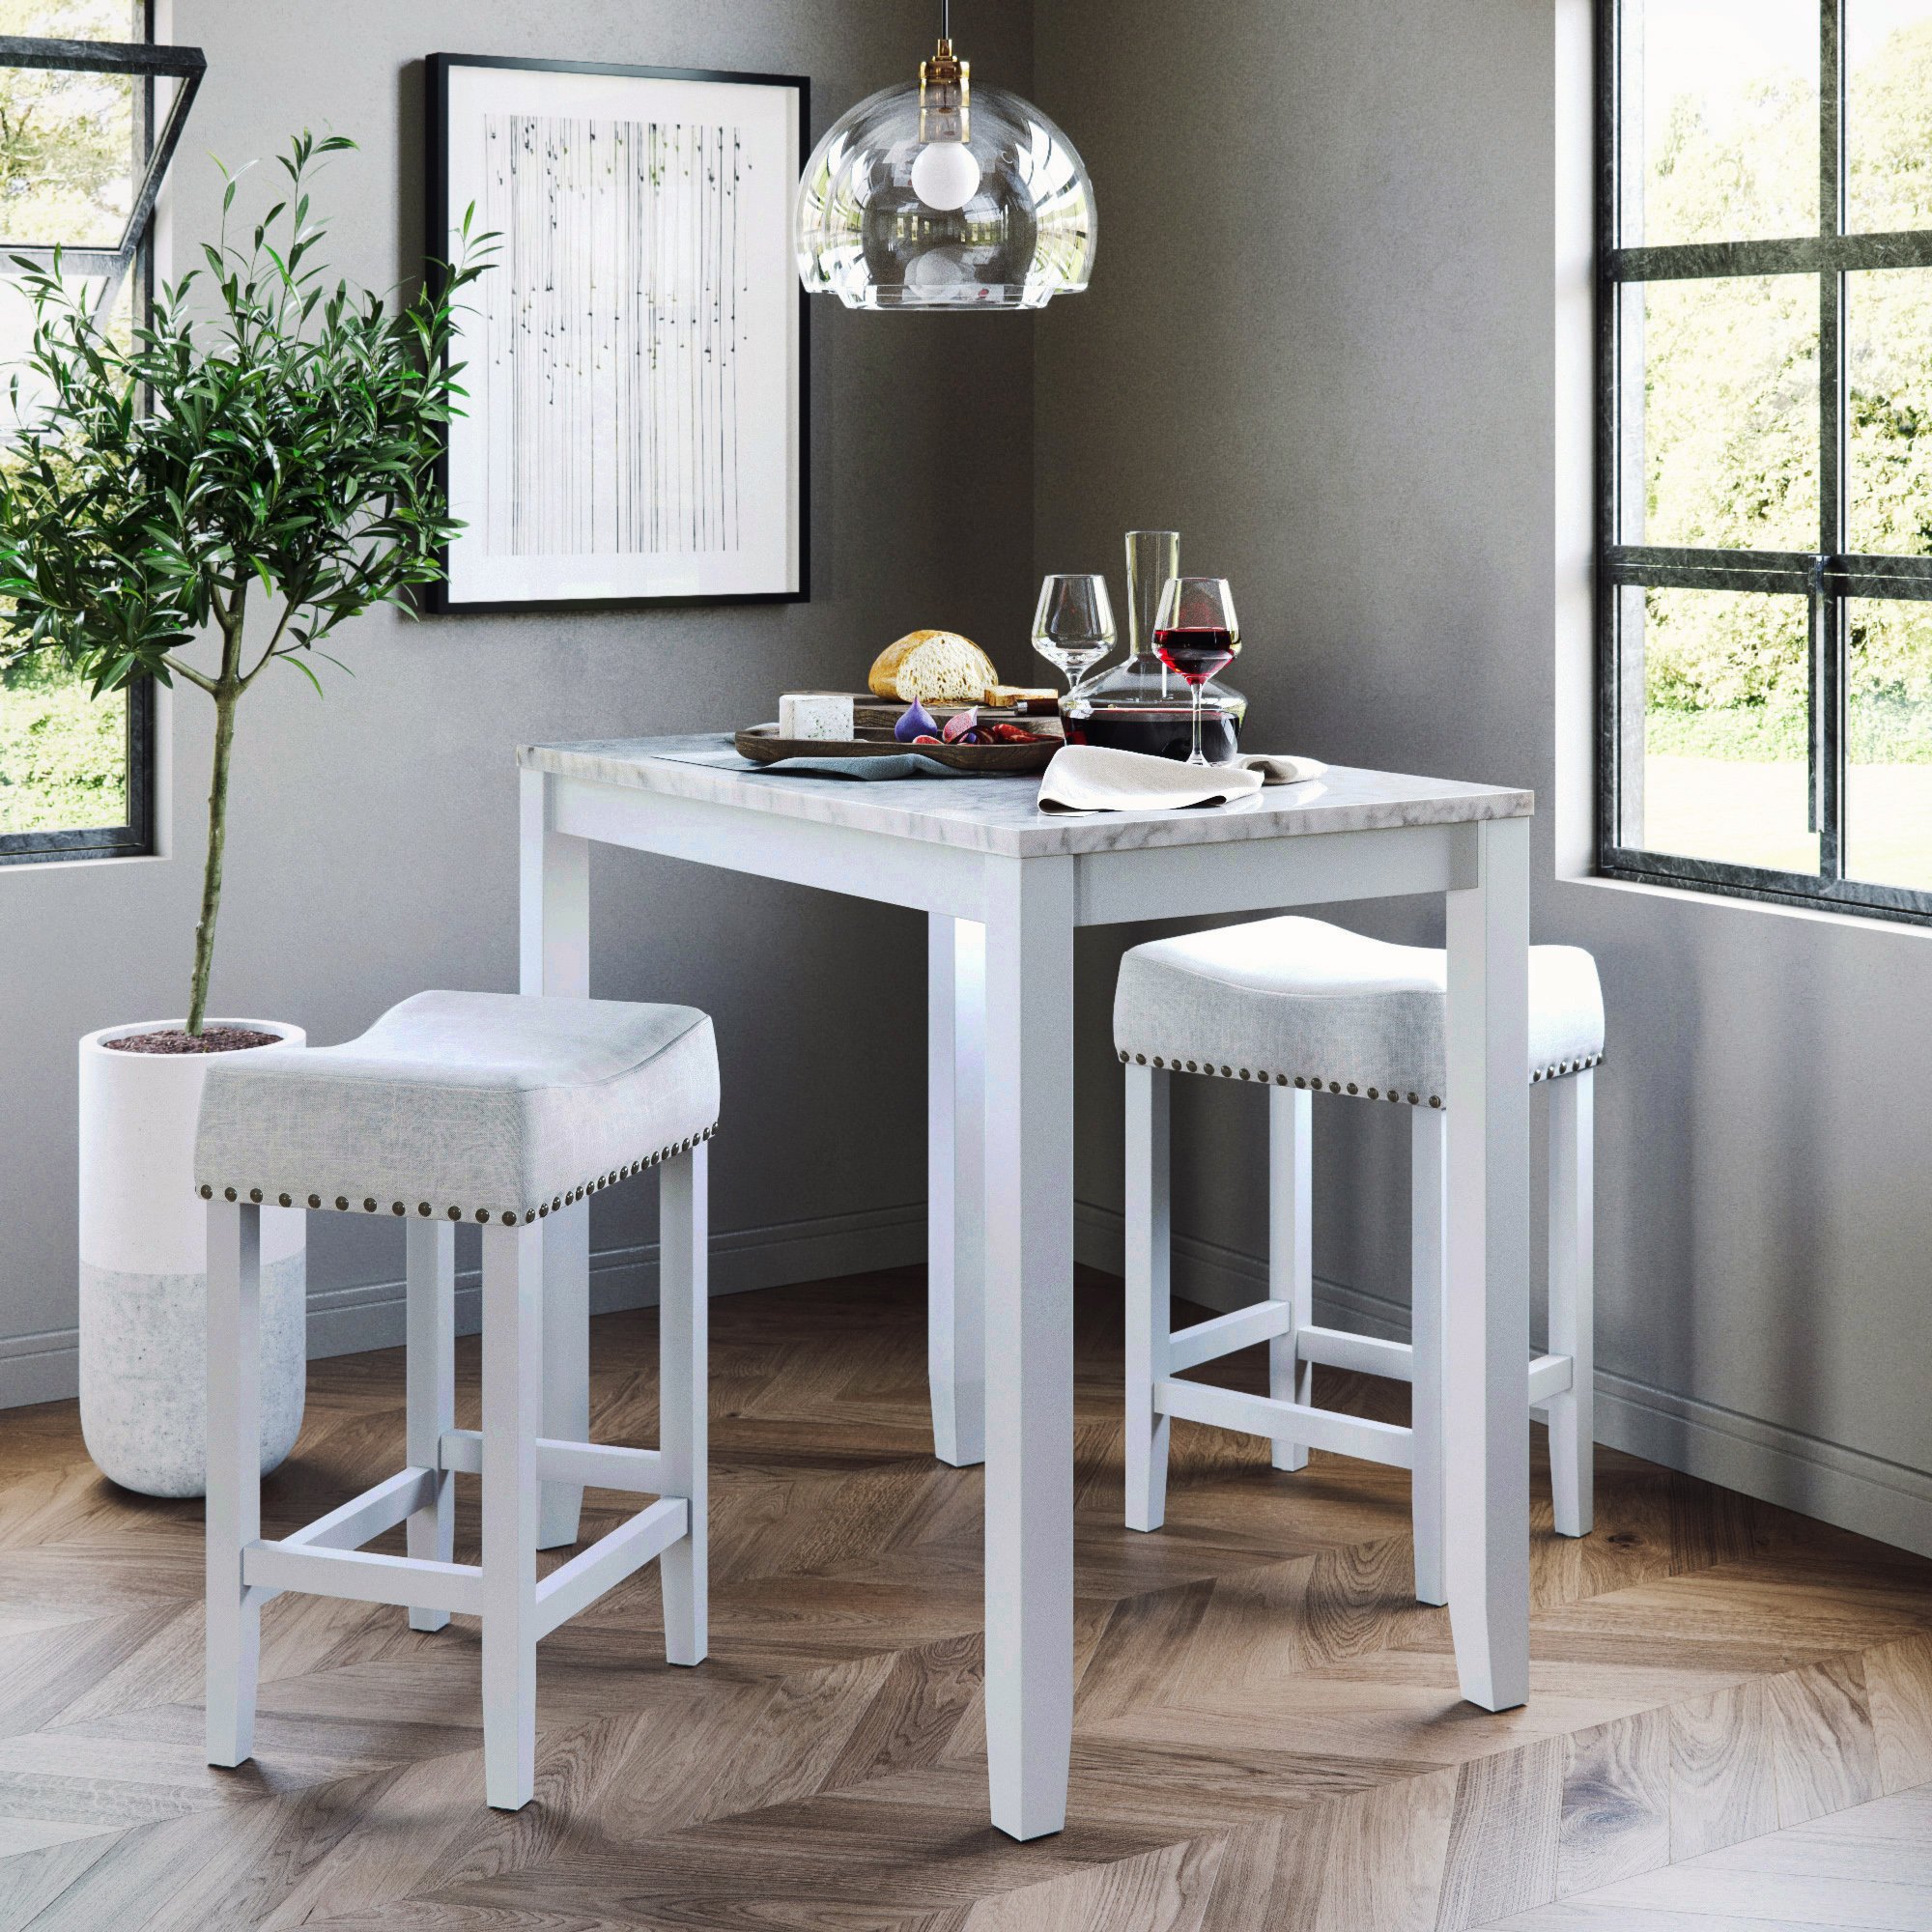 Buy Nathan James Viktor Three Piece Dining Set Kitchen Pub Table Marble Top White Wood Base Light Gray Fabric Seat Online In Hong Kong 970390178